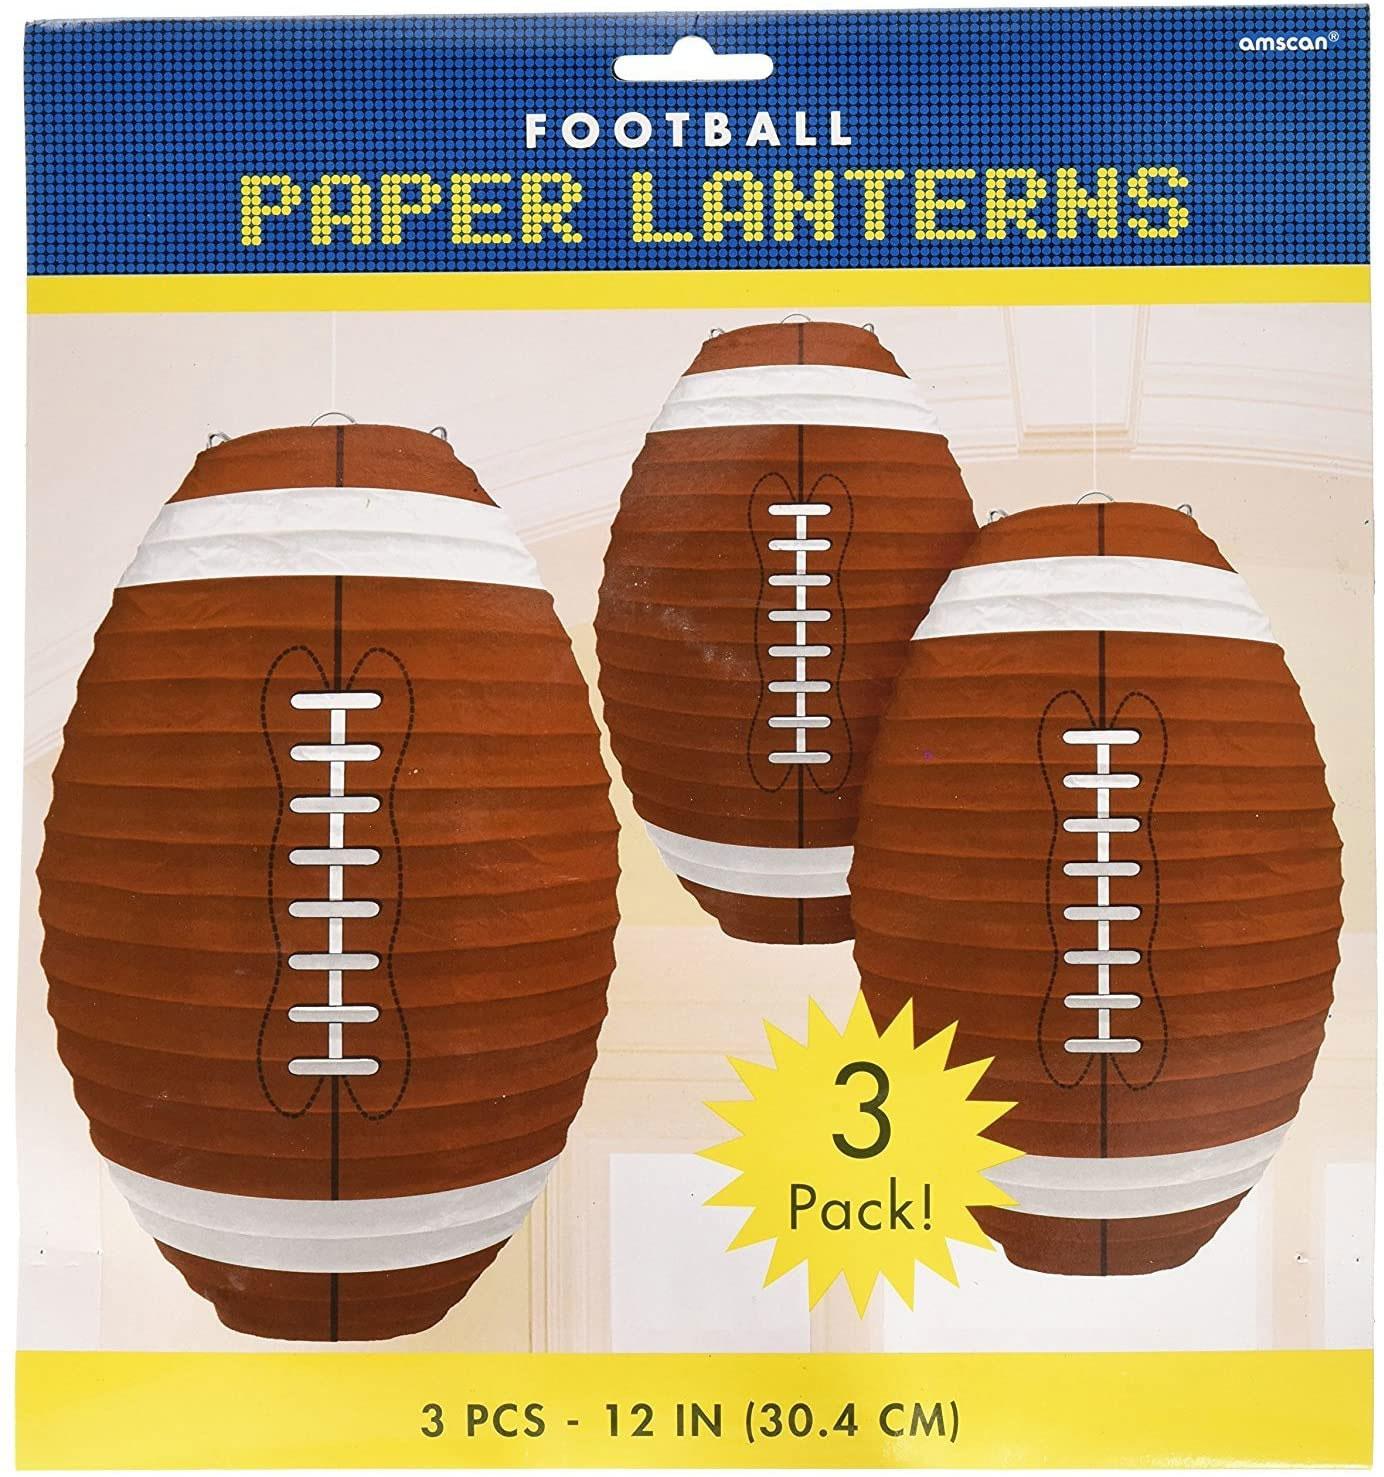 NFL American Football Paper Lanterns 3pcs by Amscan 240999 available here at Karnival Costumes online party shop